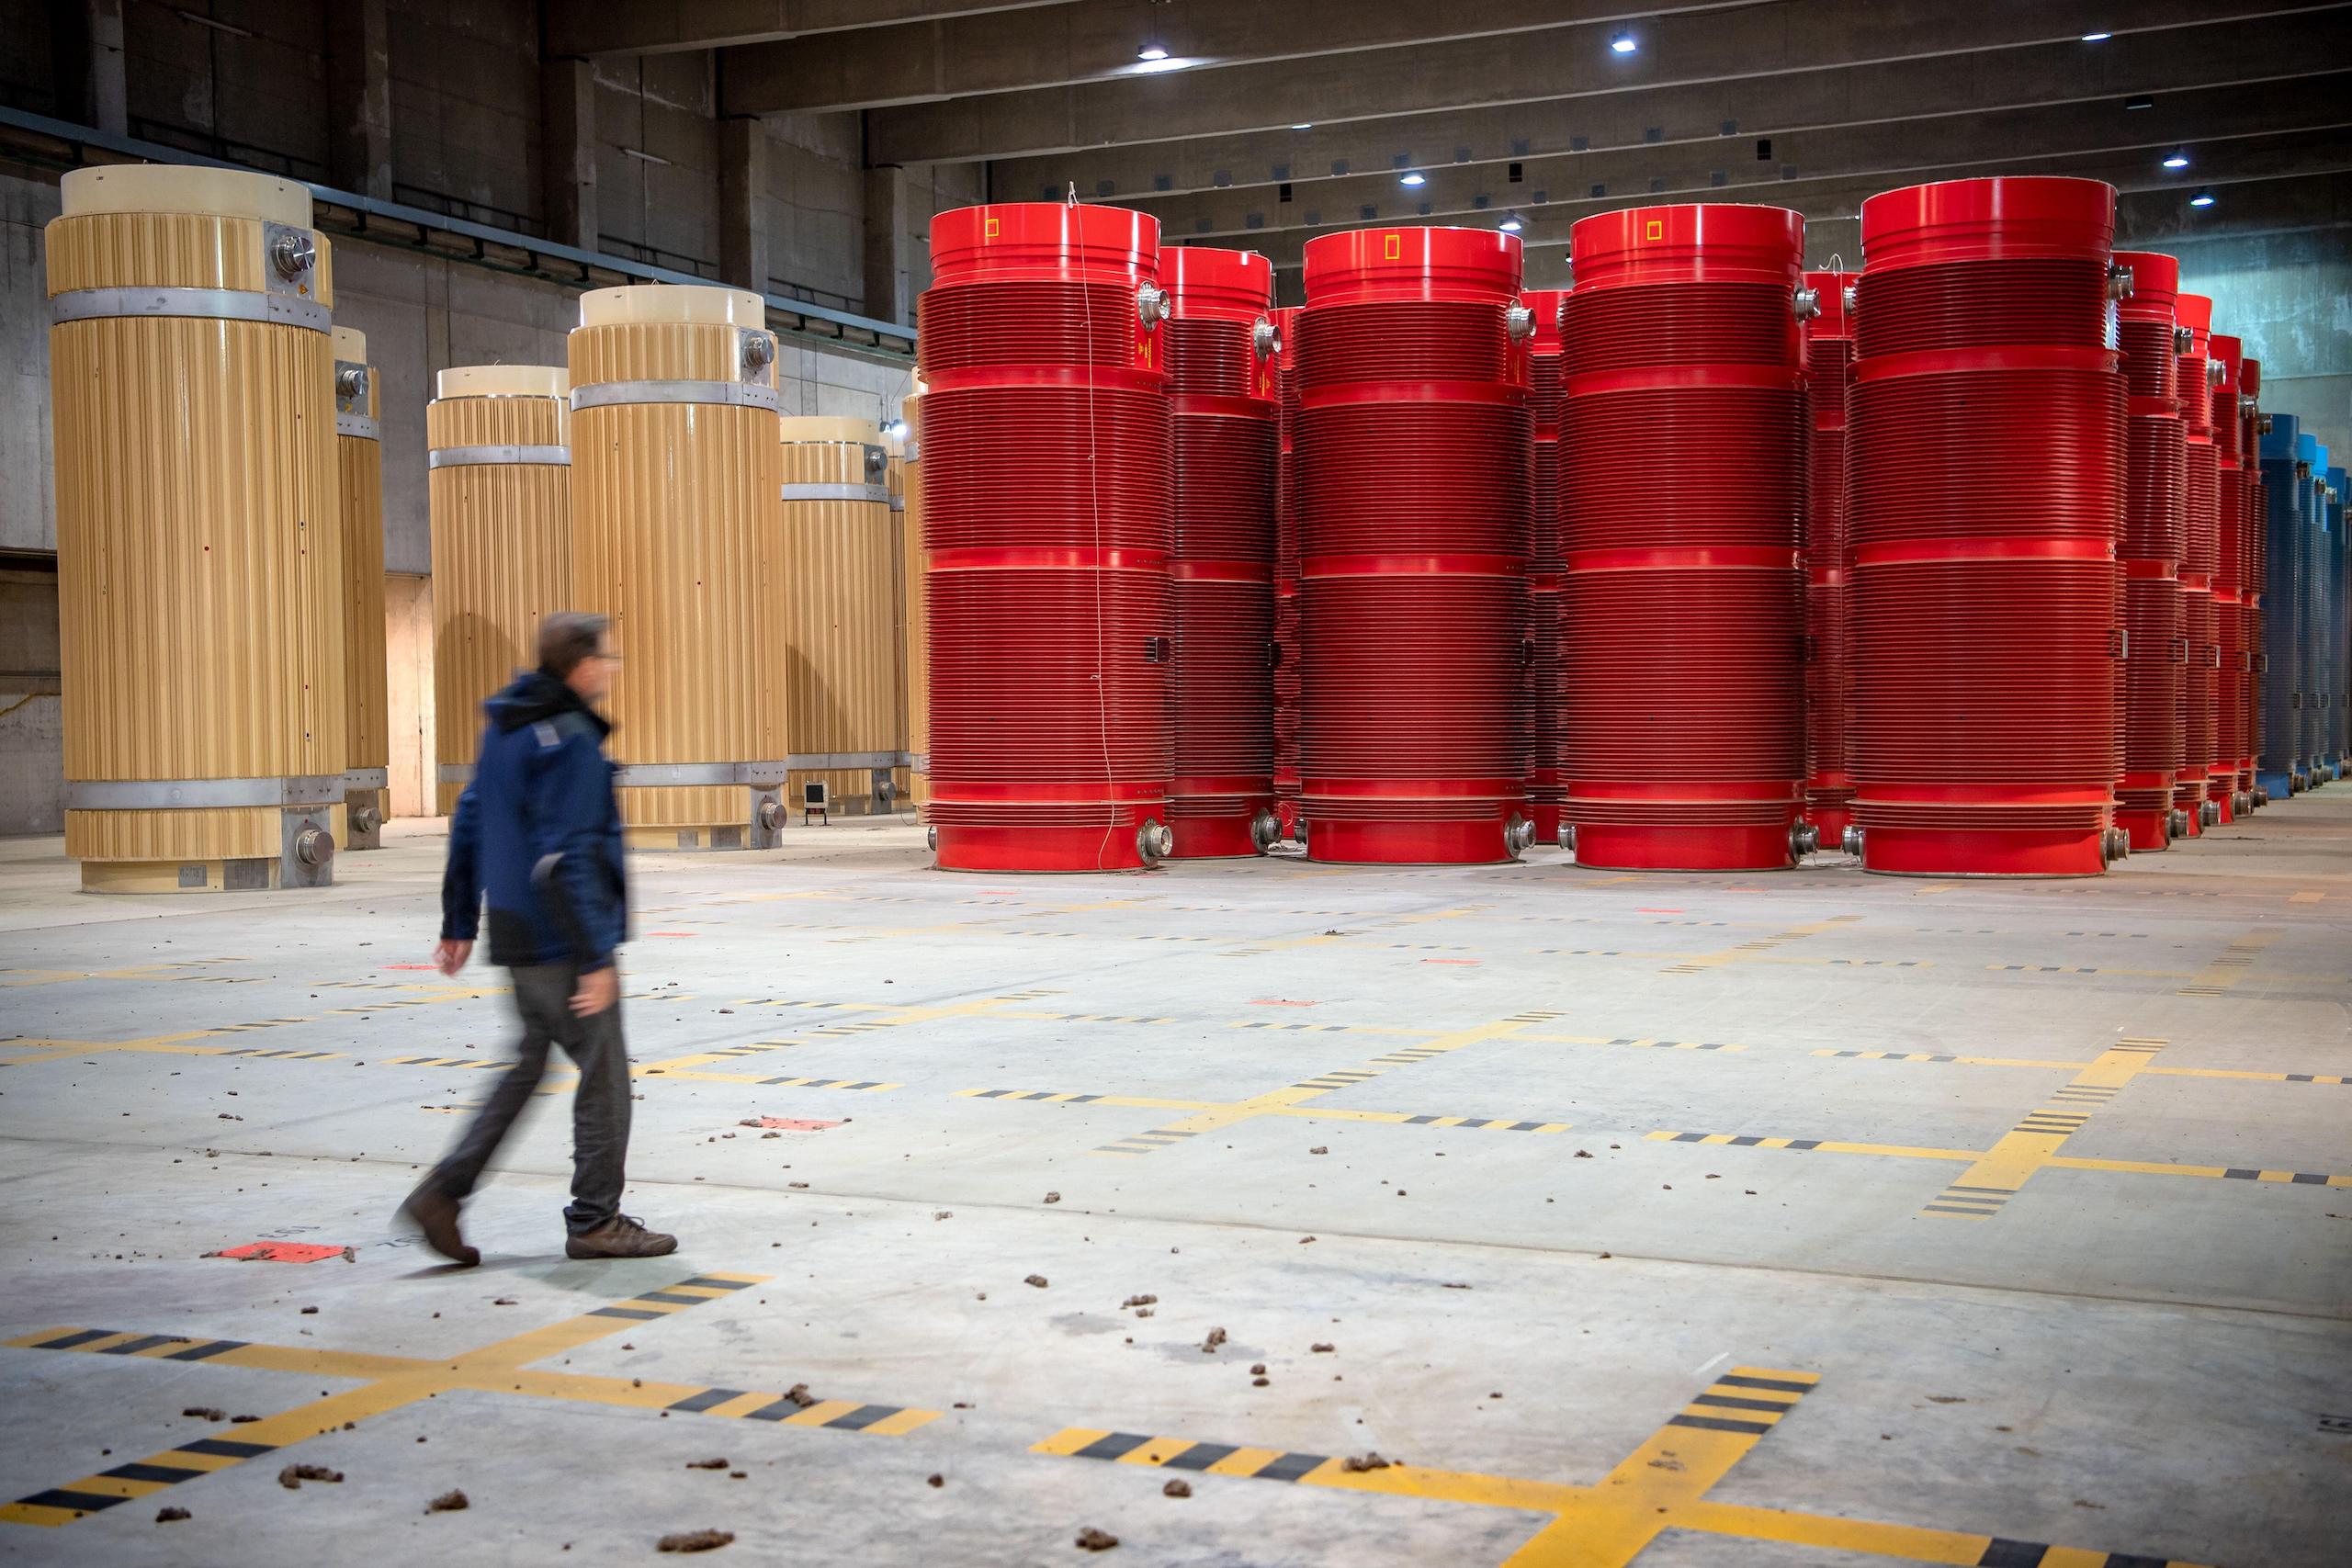 <p>The Gorleben nuclear waste facility in Lower Saxony, Germany, used as interim storage for spent fuel elements and high-level radioactive waste. Some of the waste was first brought here in 1995 and will likely remain so until a permanent solution can be found. (Image: Sina Schuldt / Alamy)</p>